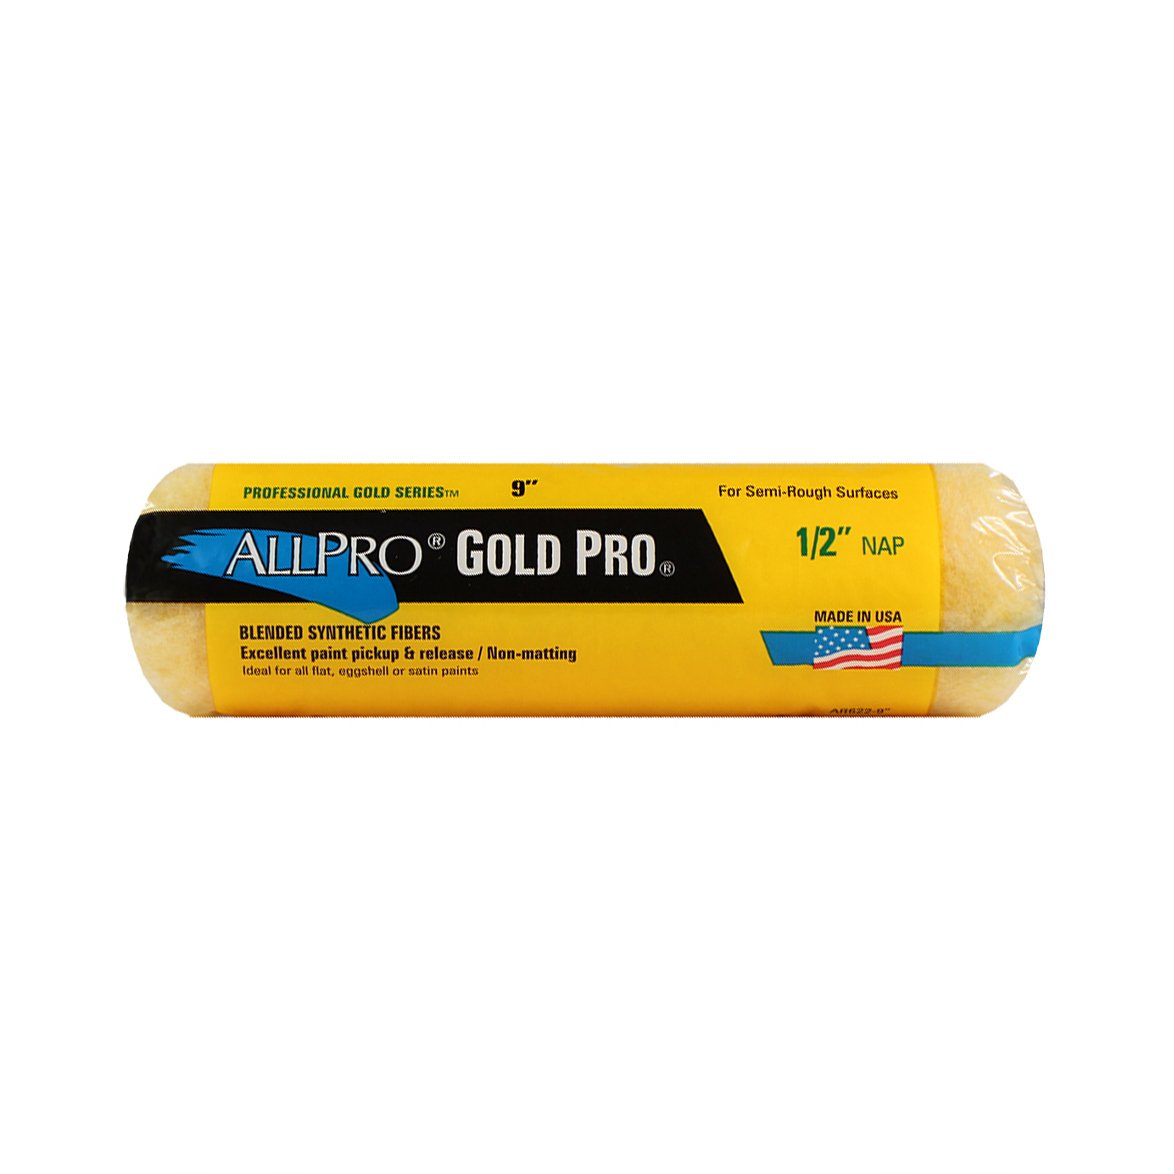 Allpro gold pro professional roller covers, available at Clement's Paint in Austin, TX. 